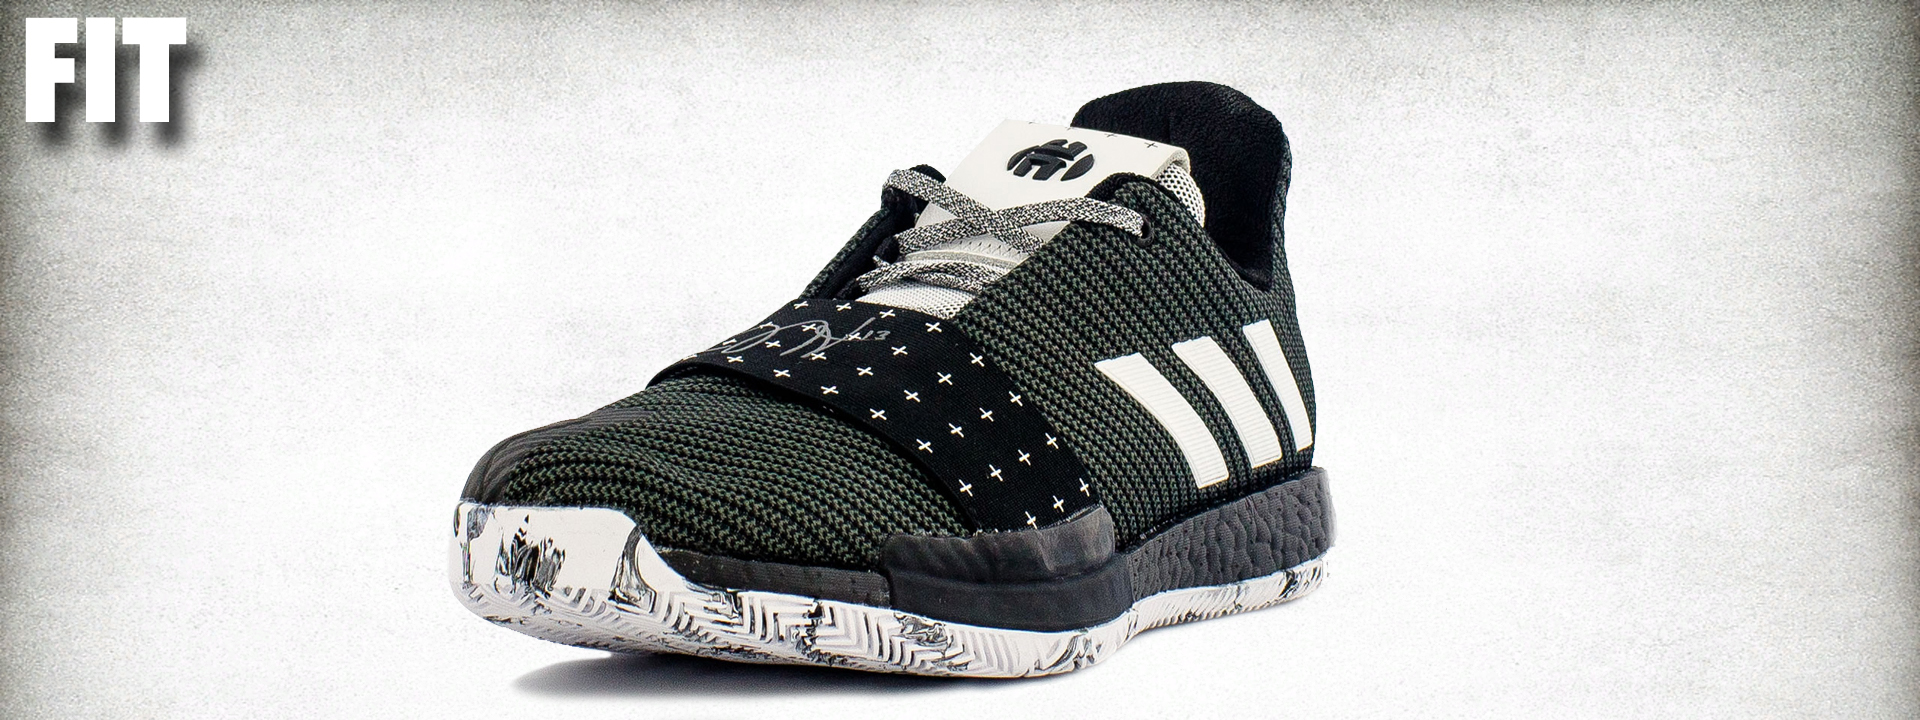 adidas Harden 3 Performance Review -